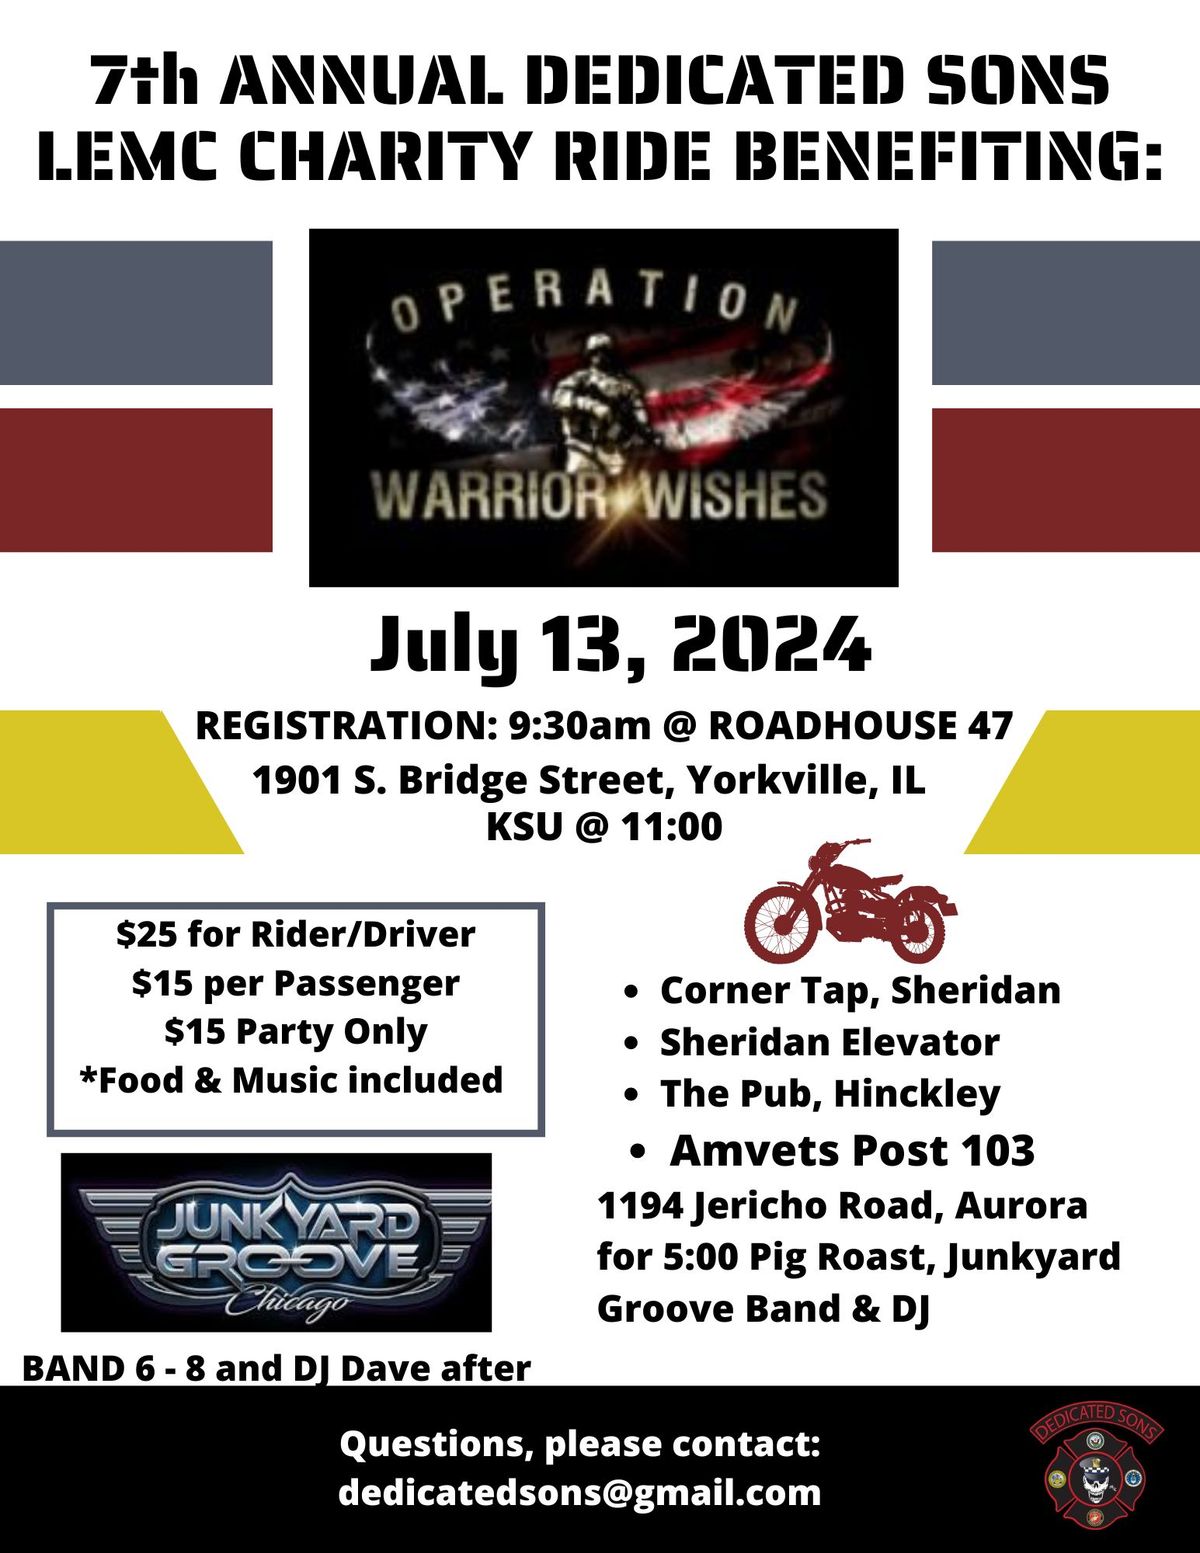 7th Annual Operation Warrior Wishes Charity Ride 